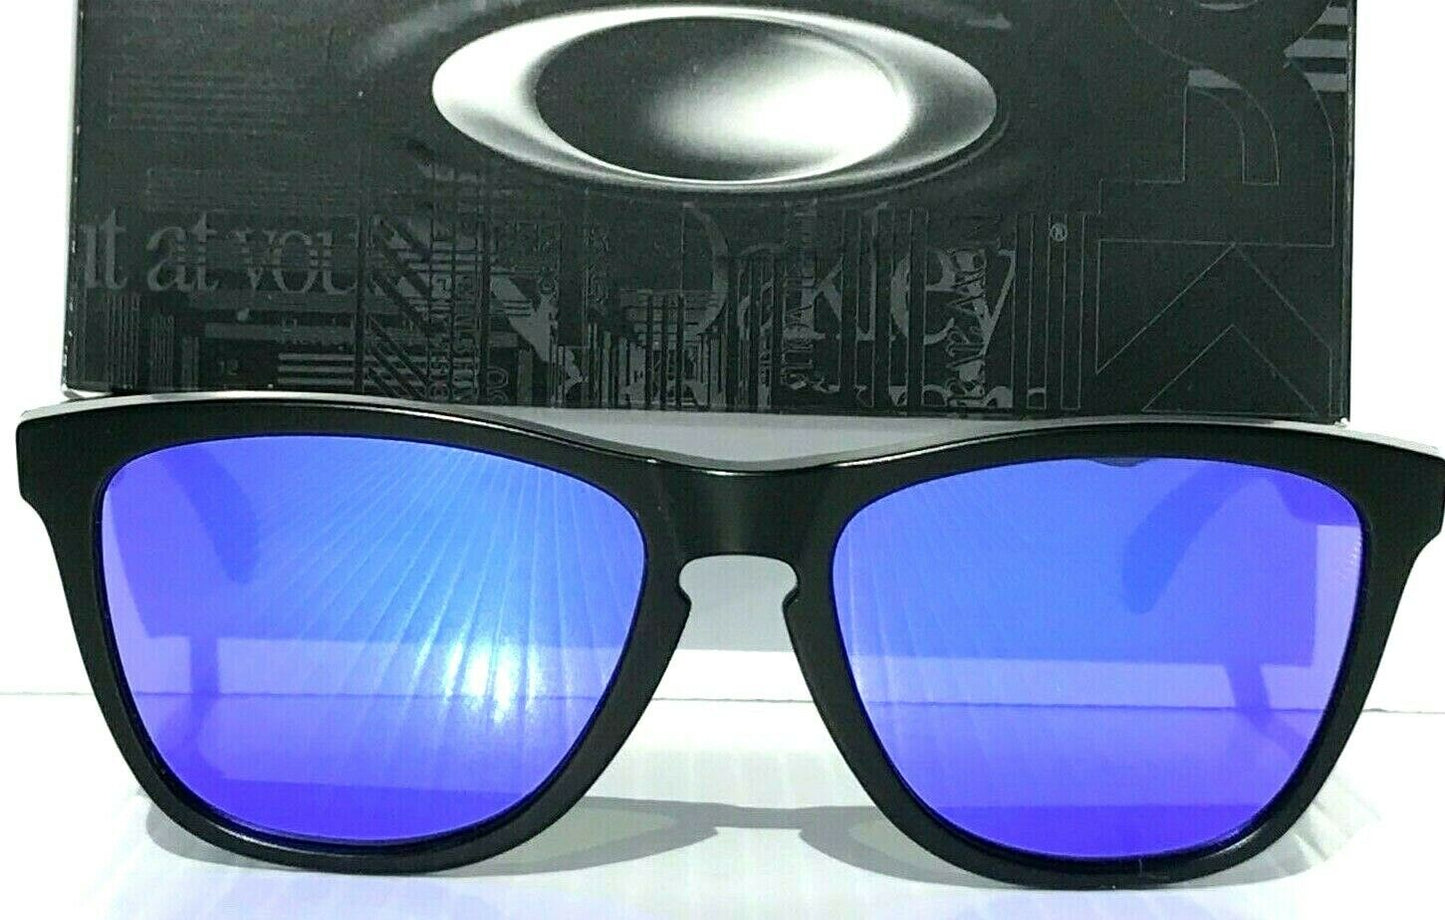 SPECTRA USA Replacement Lenses - LENS ONLY Oakley FROGSKINS 9013